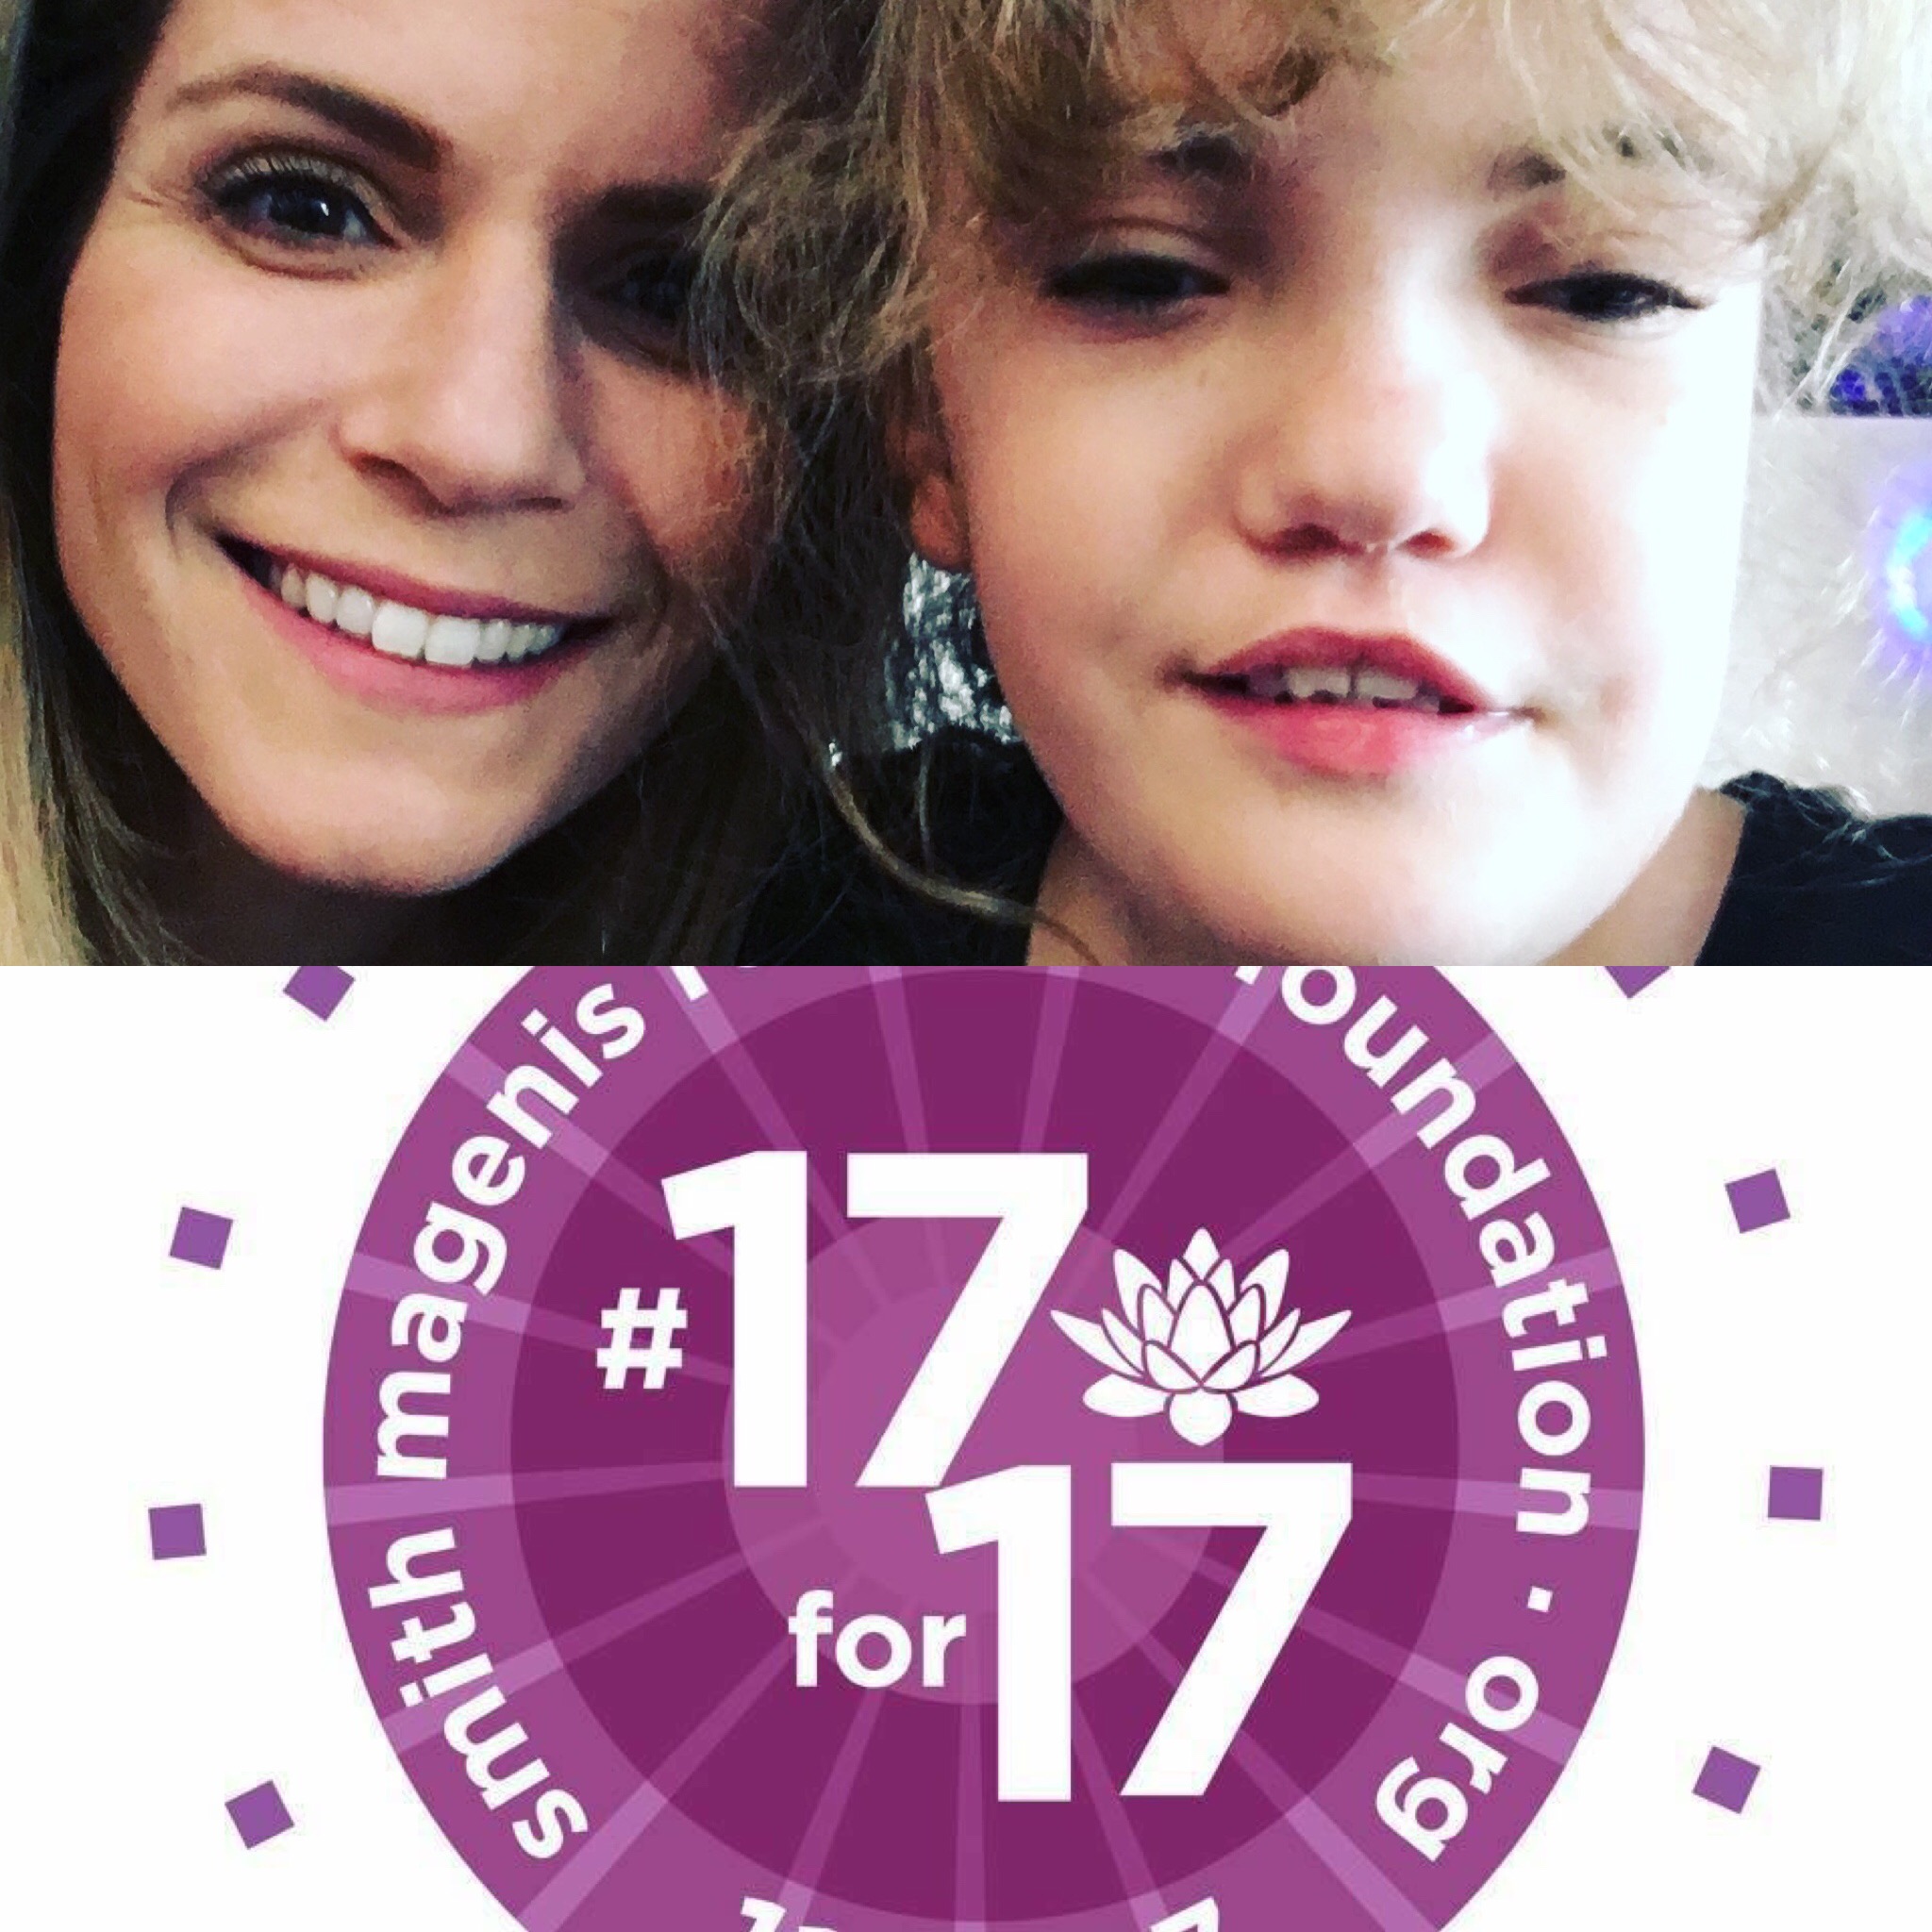 The author and her daughter with the SMS foundation's 17 for 17 logo